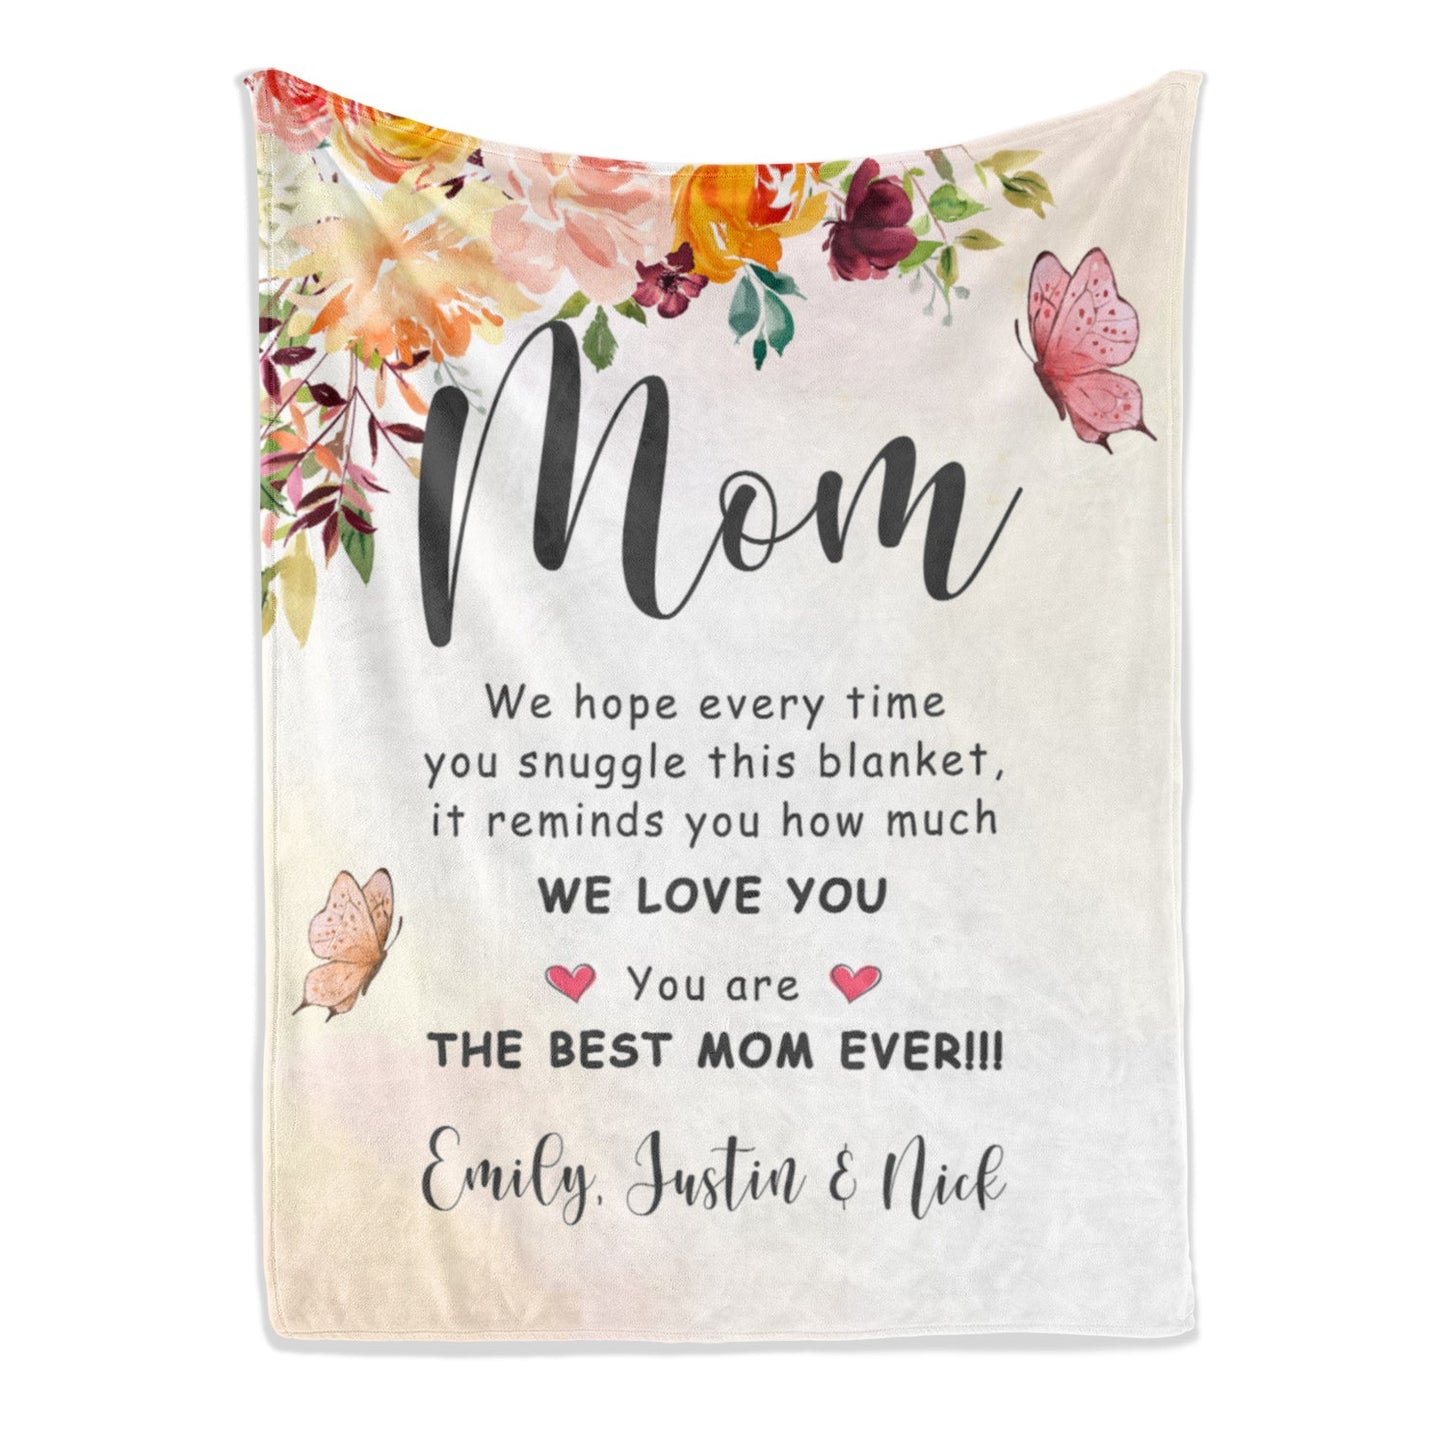 You are the best mom ever - Personalized Mother's Day or Birthday gift for Mom - Custom Blanket - MyMindfulGifts